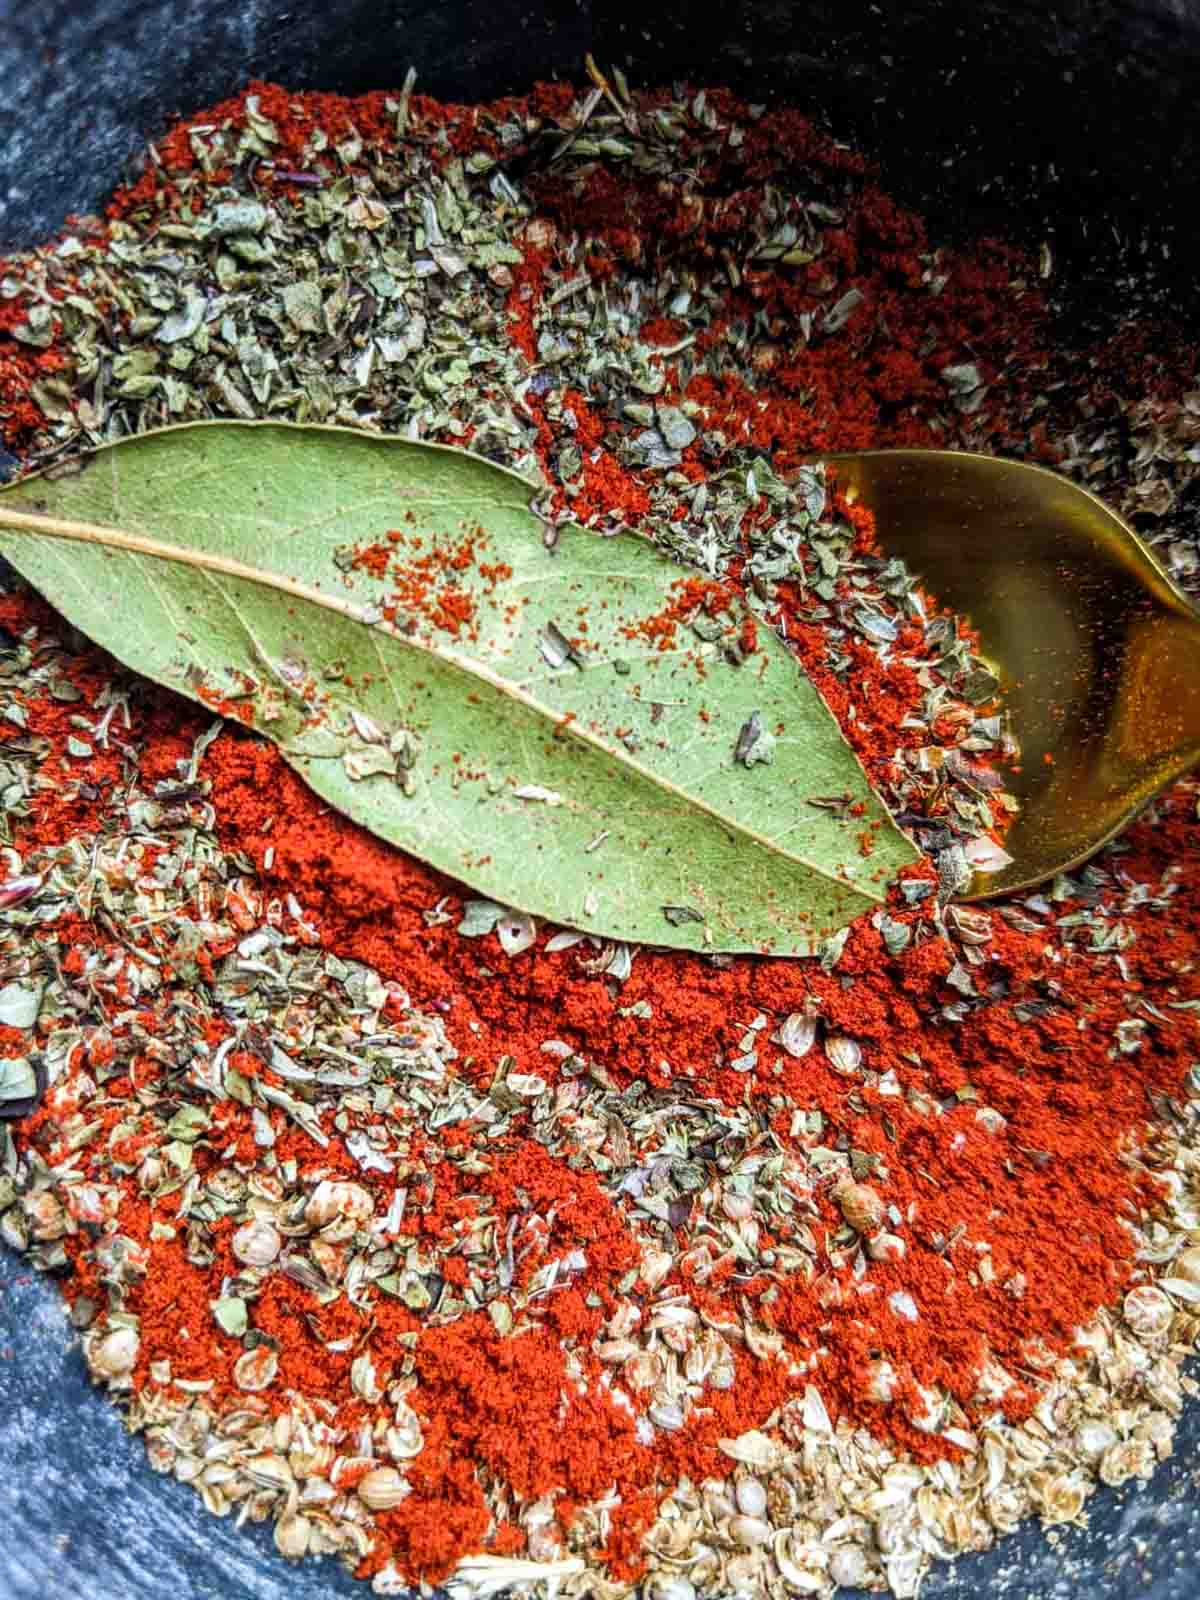 Berbere spice in the process of being ground in a mortar and pestle; a whole bay leaf is visible.